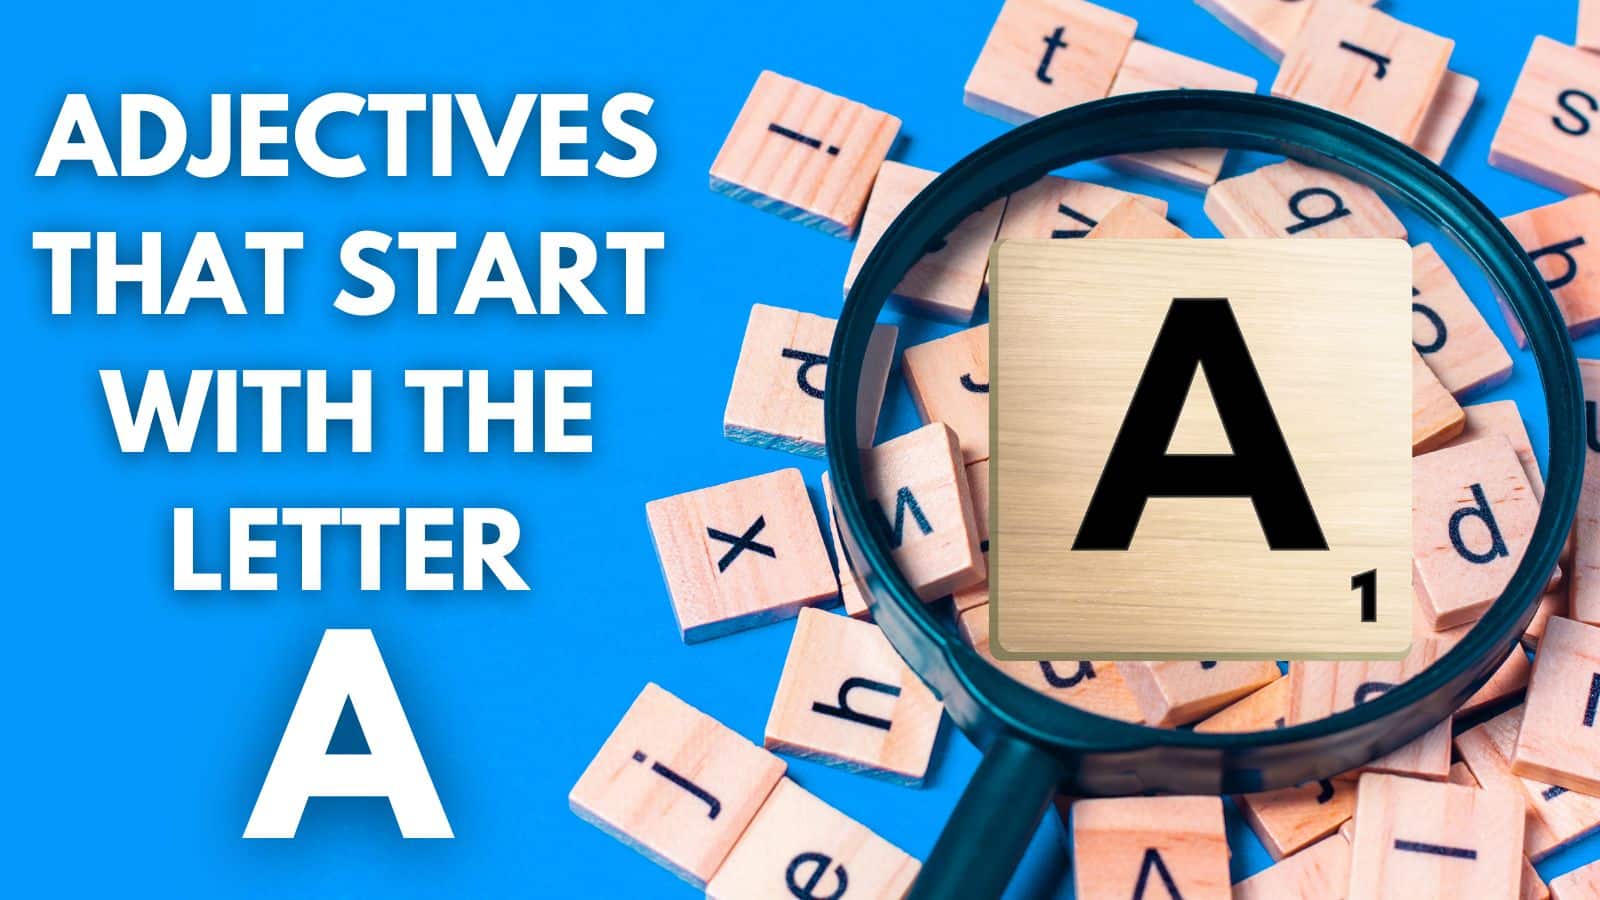 title text "adjectives that start with the letter a" next to scrabble tiles with magnifying glass over the letter A tile